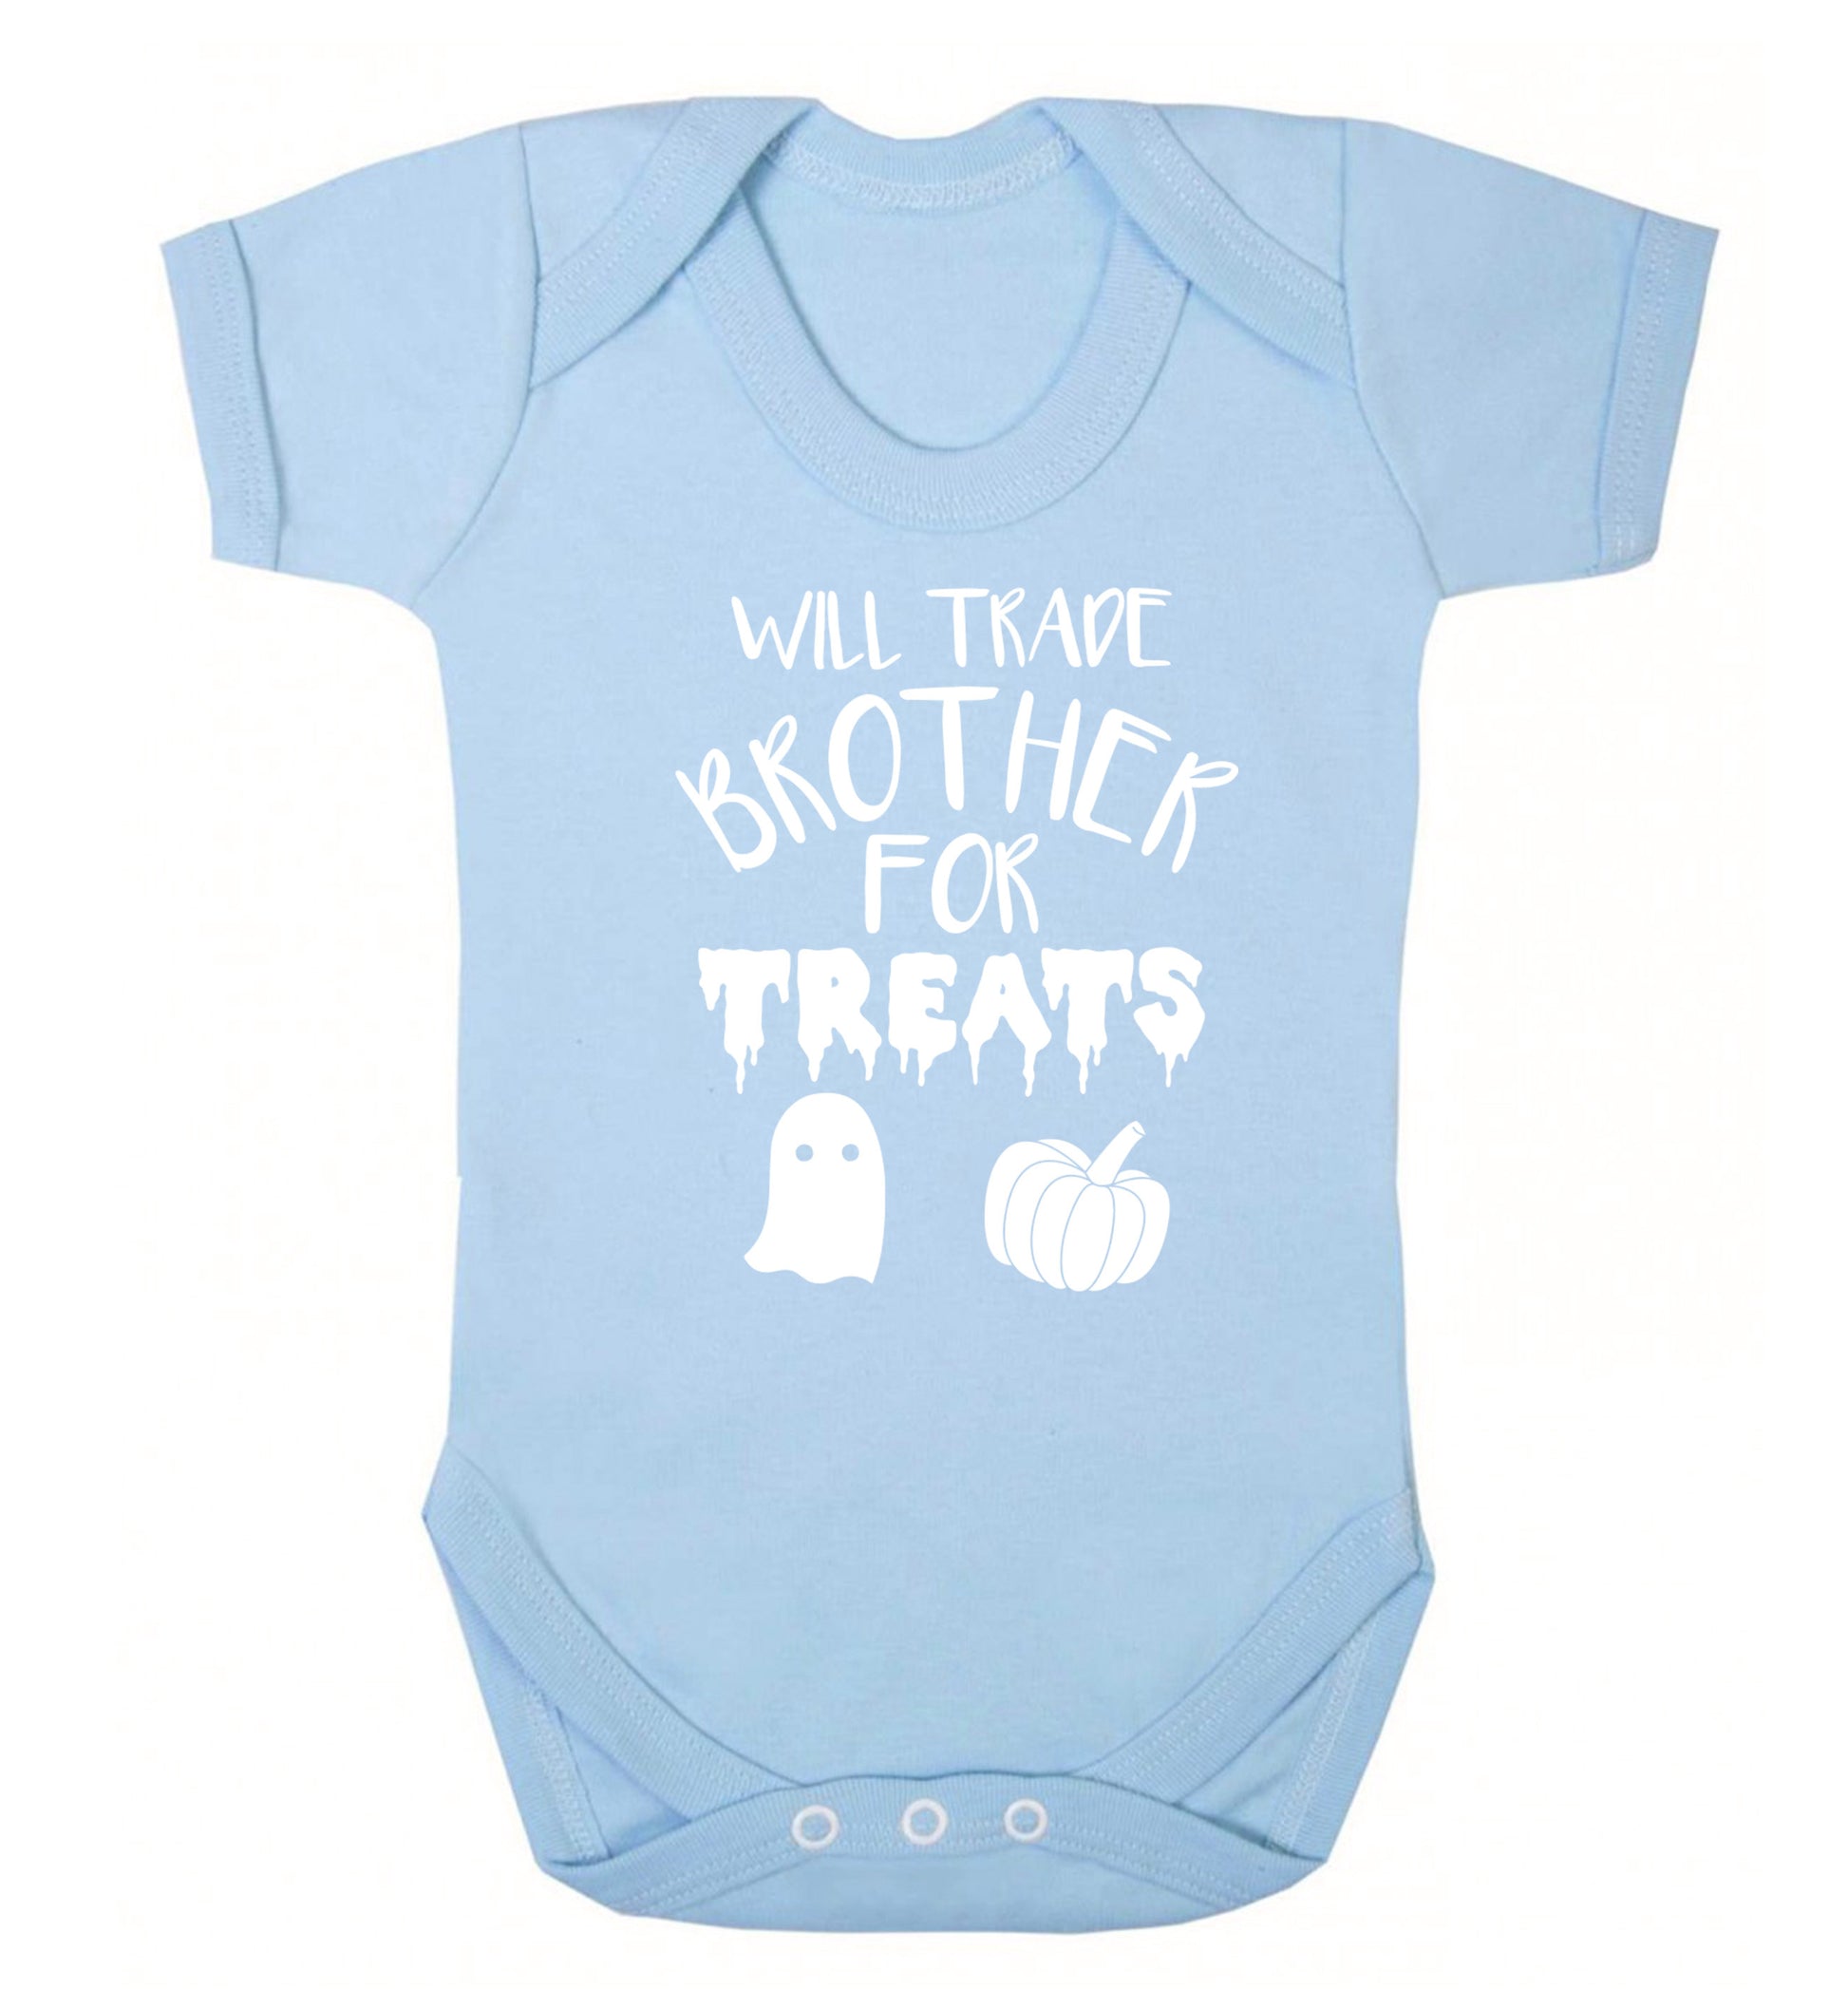 Will trade brother for treats Baby Vest pale blue 18-24 months